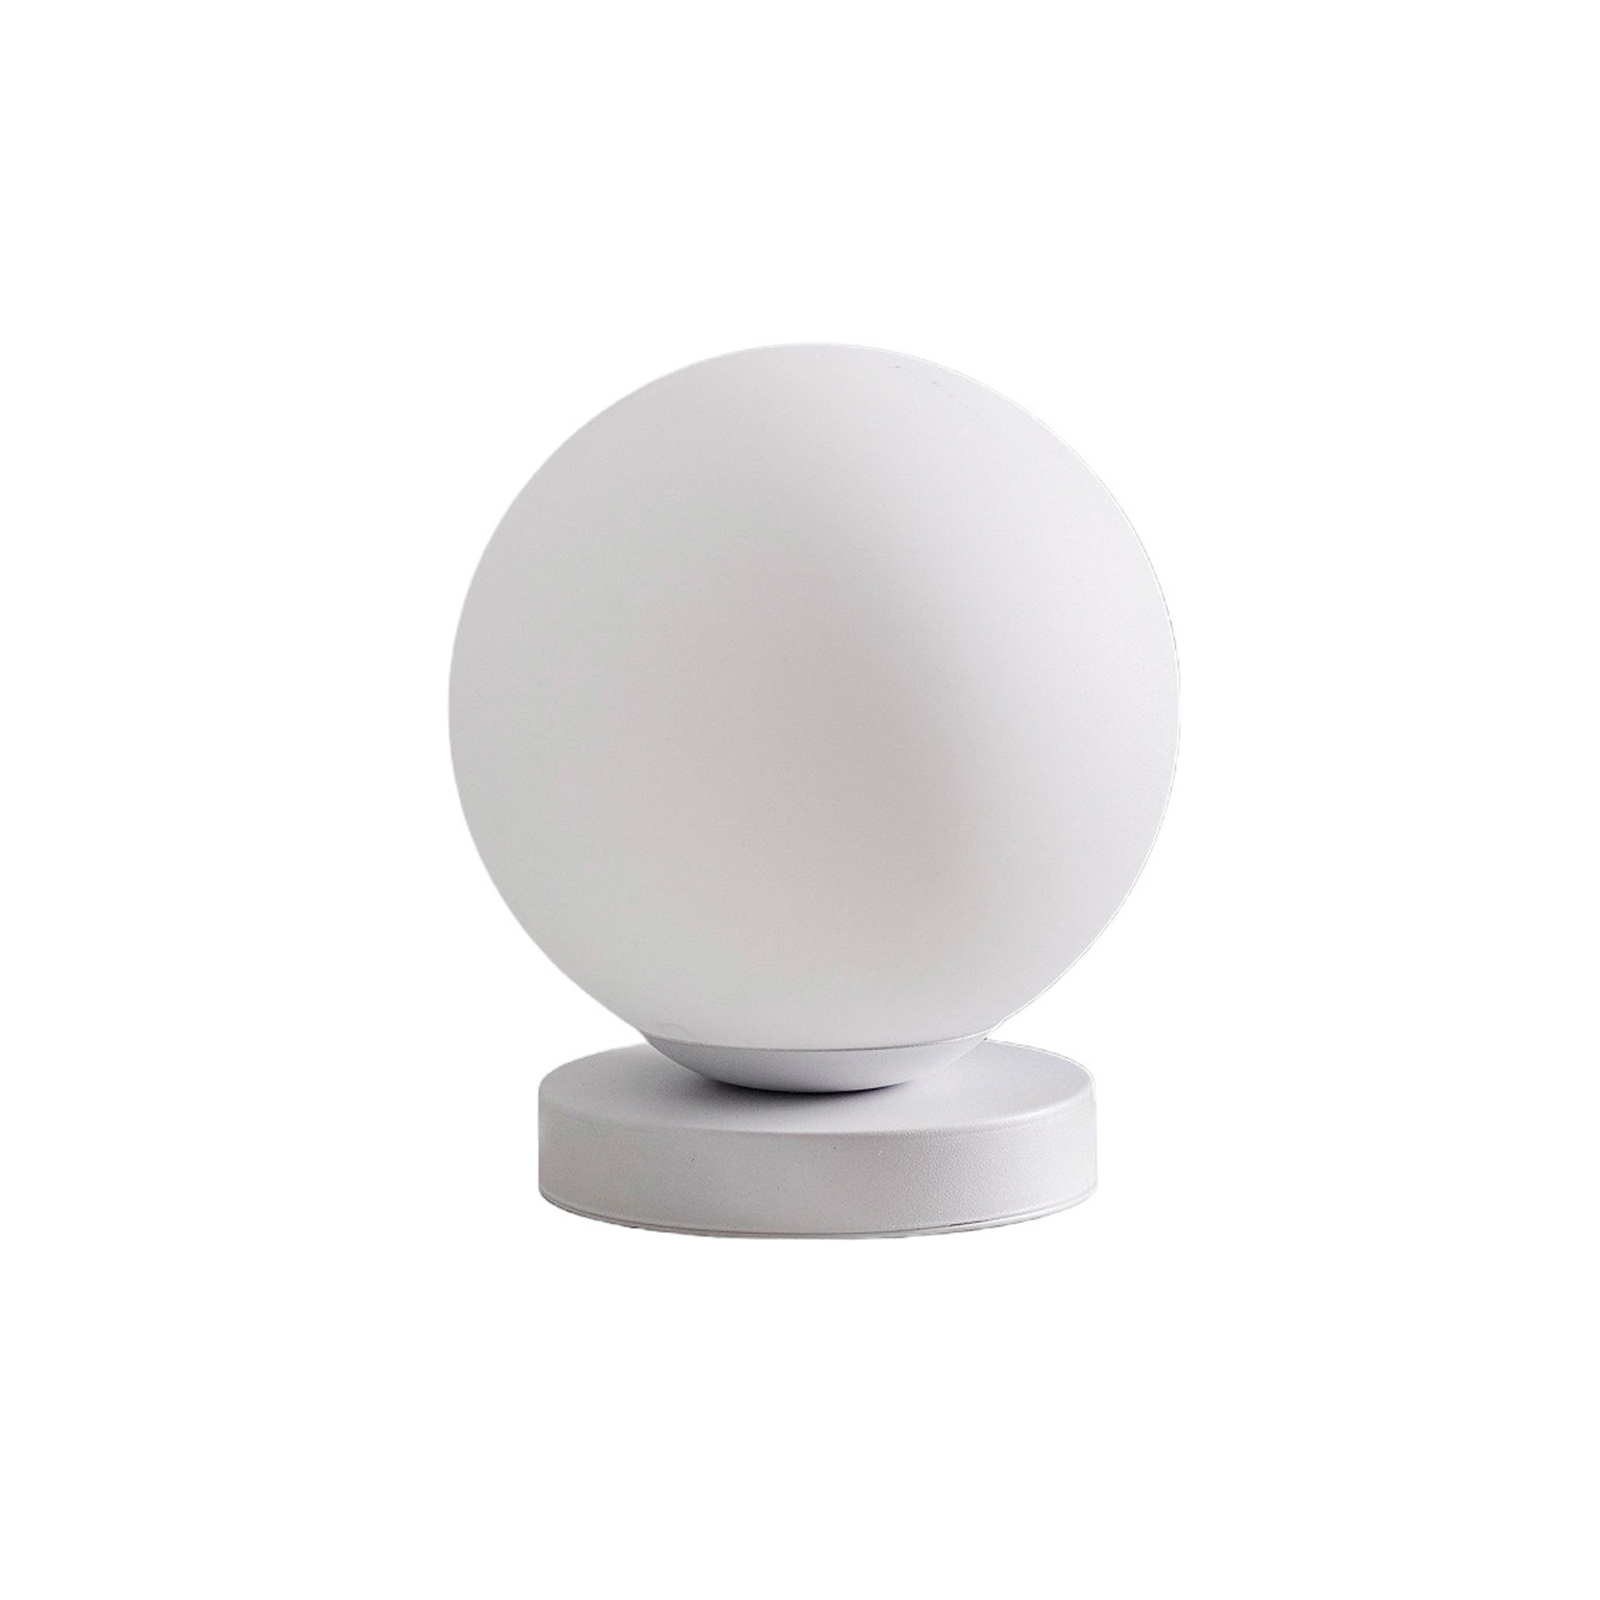 Lampe de table Ball, support blanc